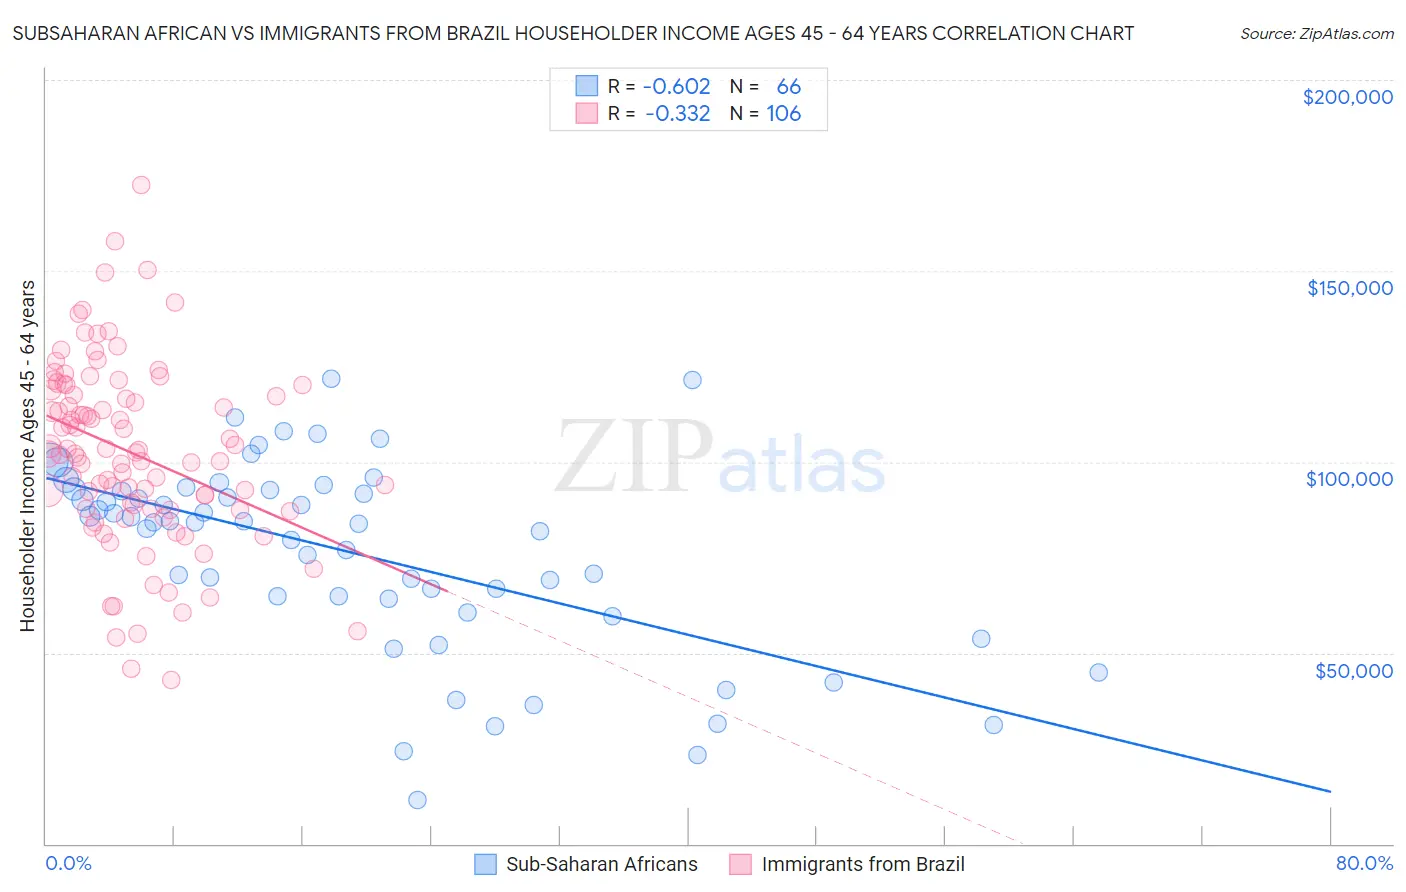 Subsaharan African vs Immigrants from Brazil Householder Income Ages 45 - 64 years